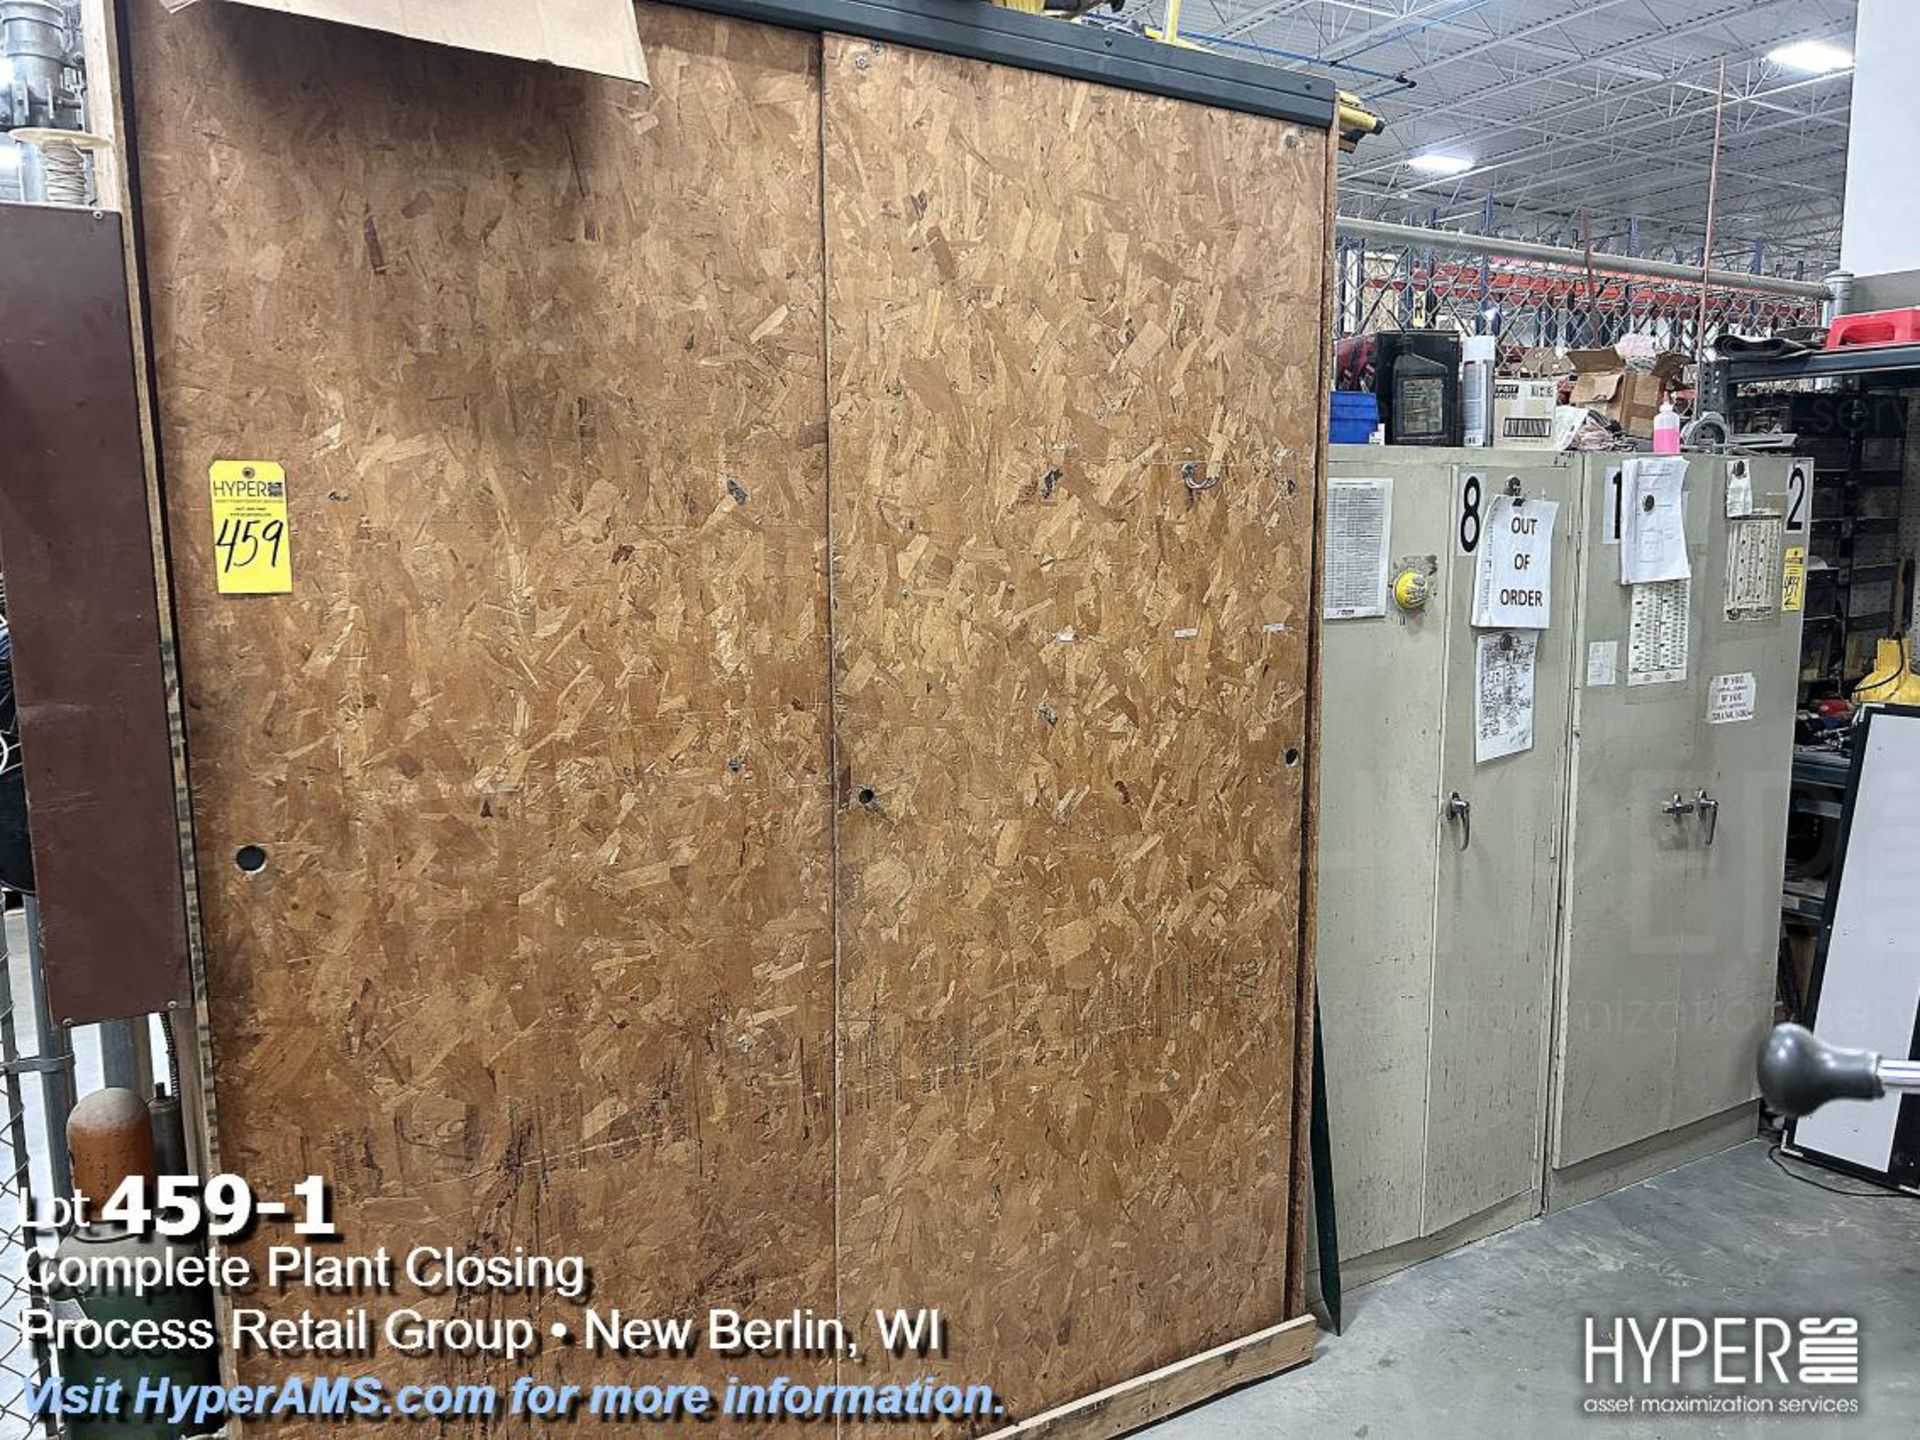 Three cabinets with hoses, sealers, wire, fuses, filters, and parts